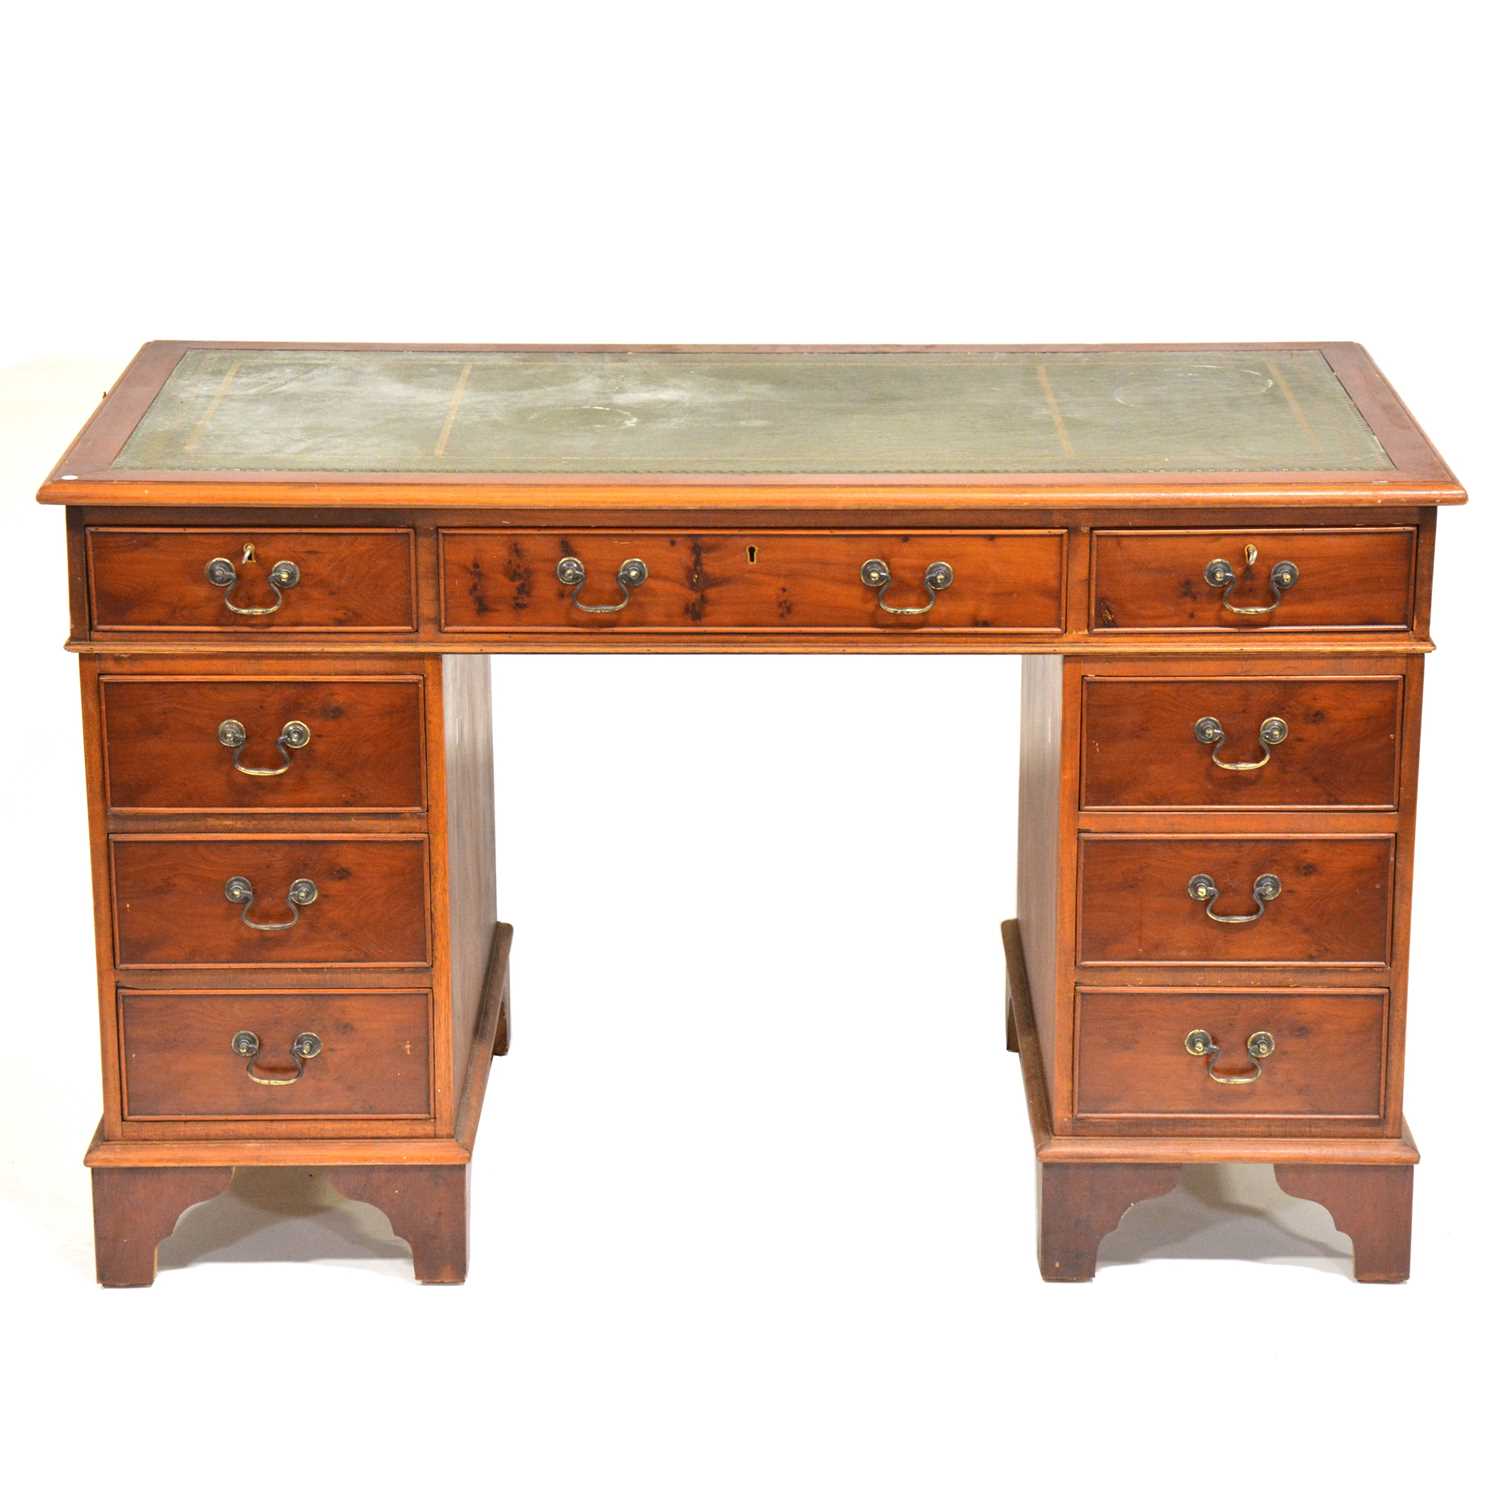 Reproduction yew wood twin pedestal desk,